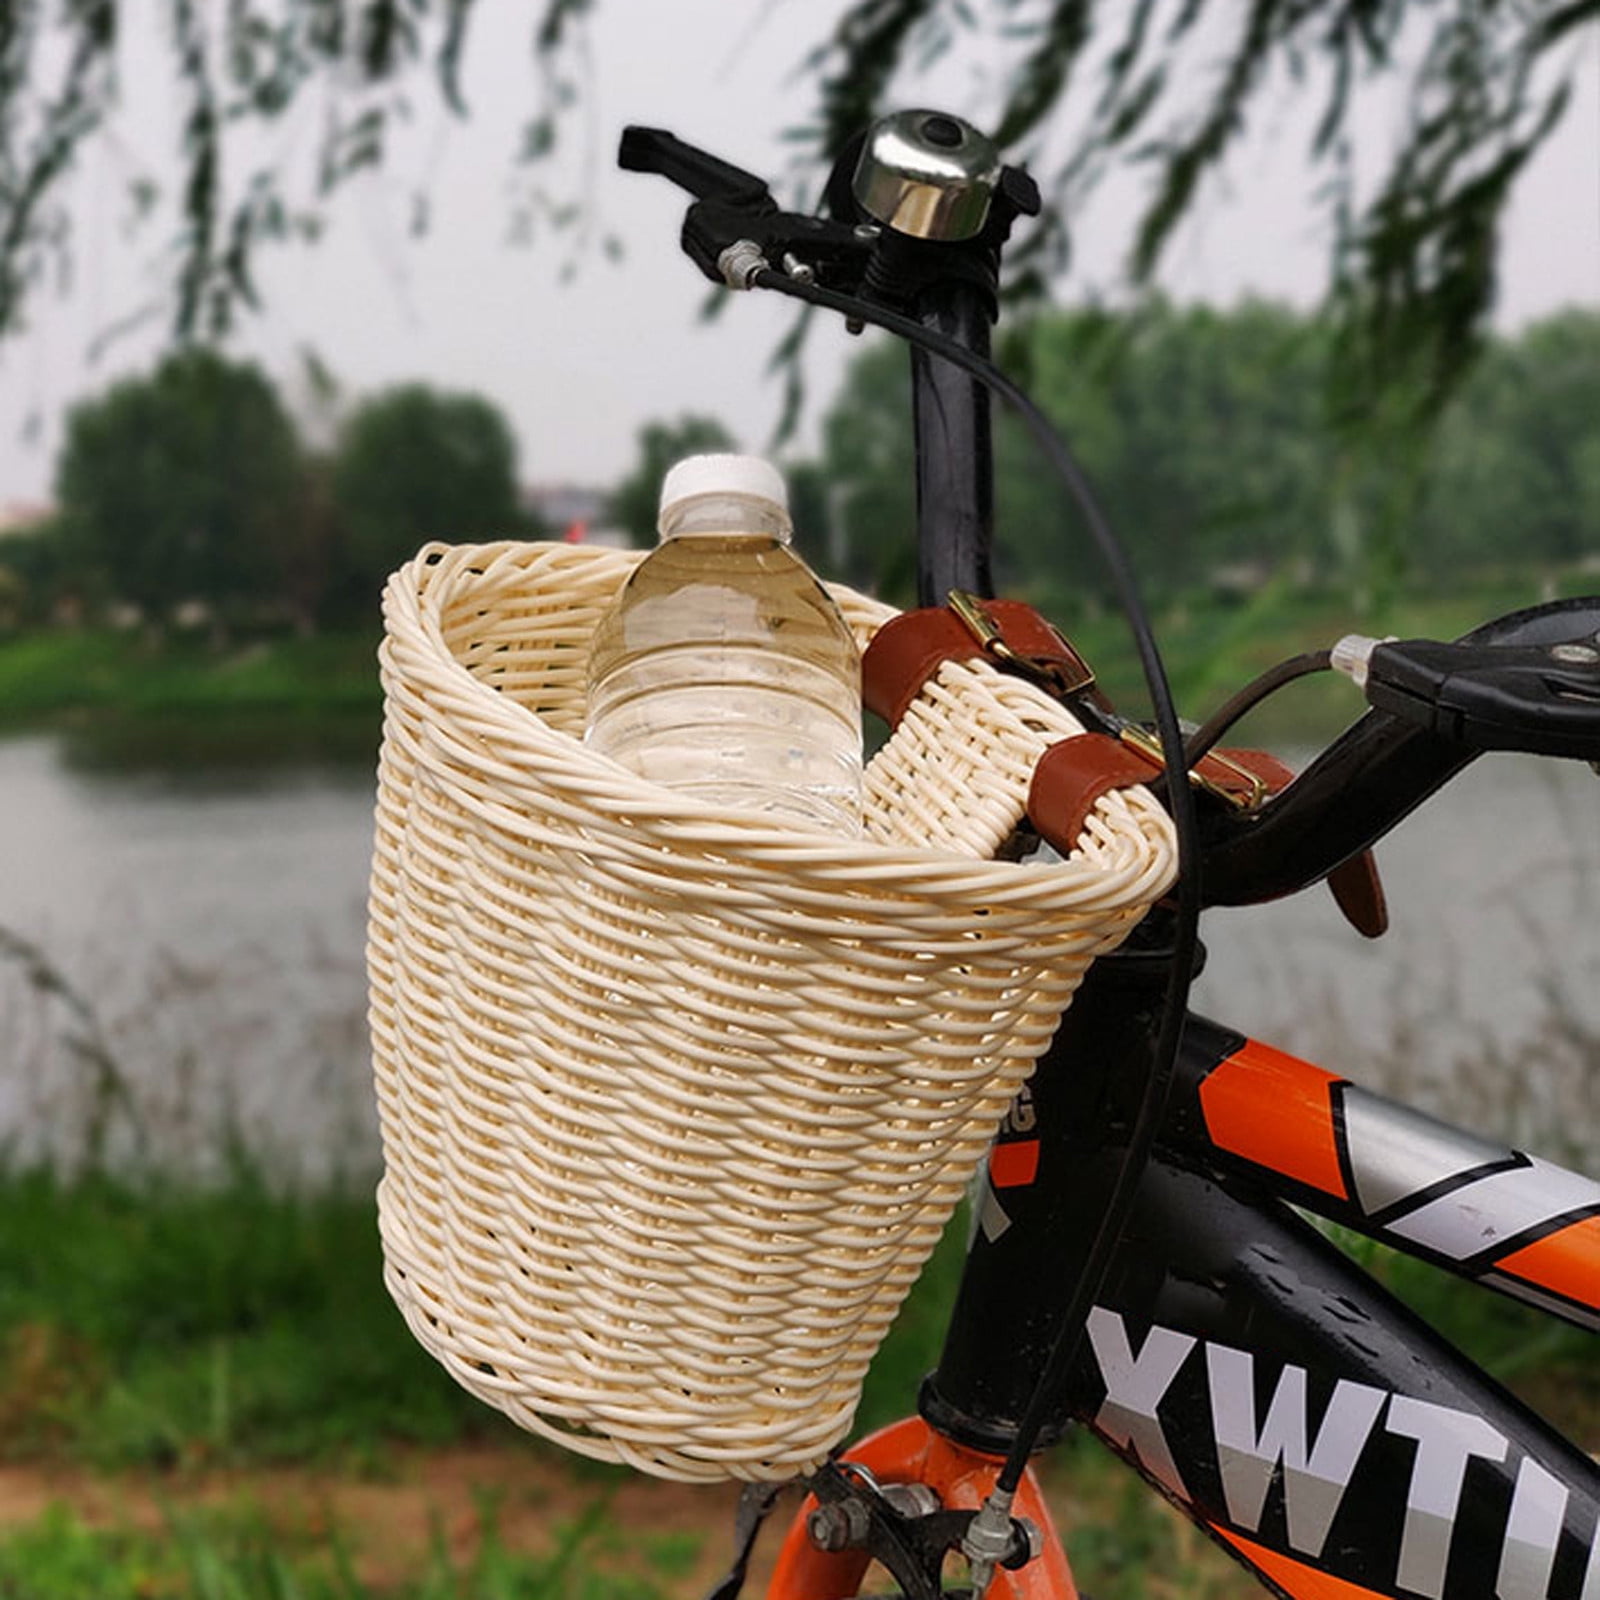 Childrens Wicker Bicycle MTB Shopping Basket For Kids Boys Girls Bike Cycle New 